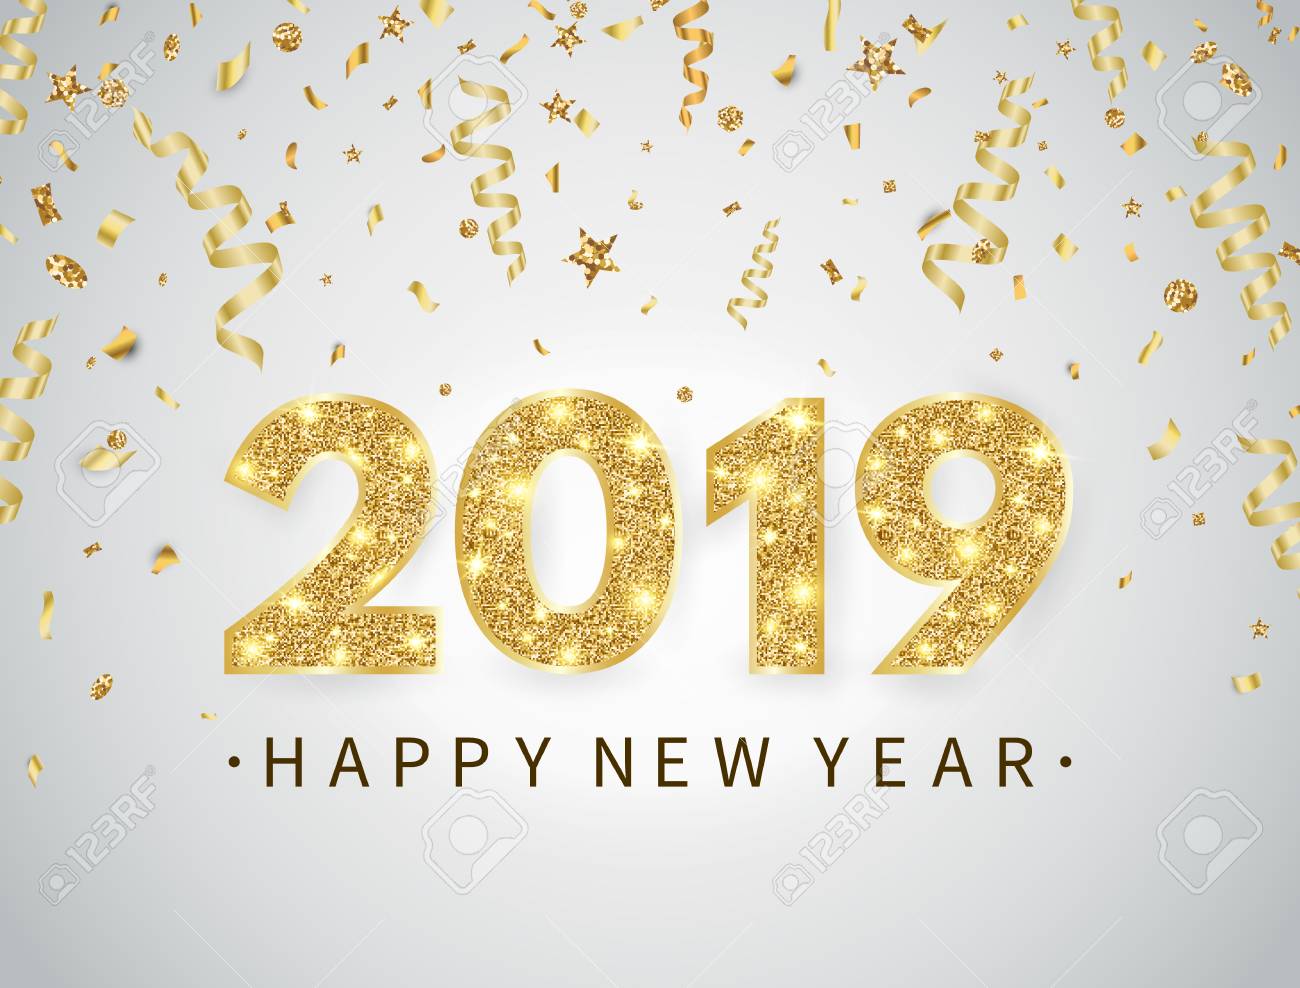 Happy New Year Background With Gold Confetti Glitter